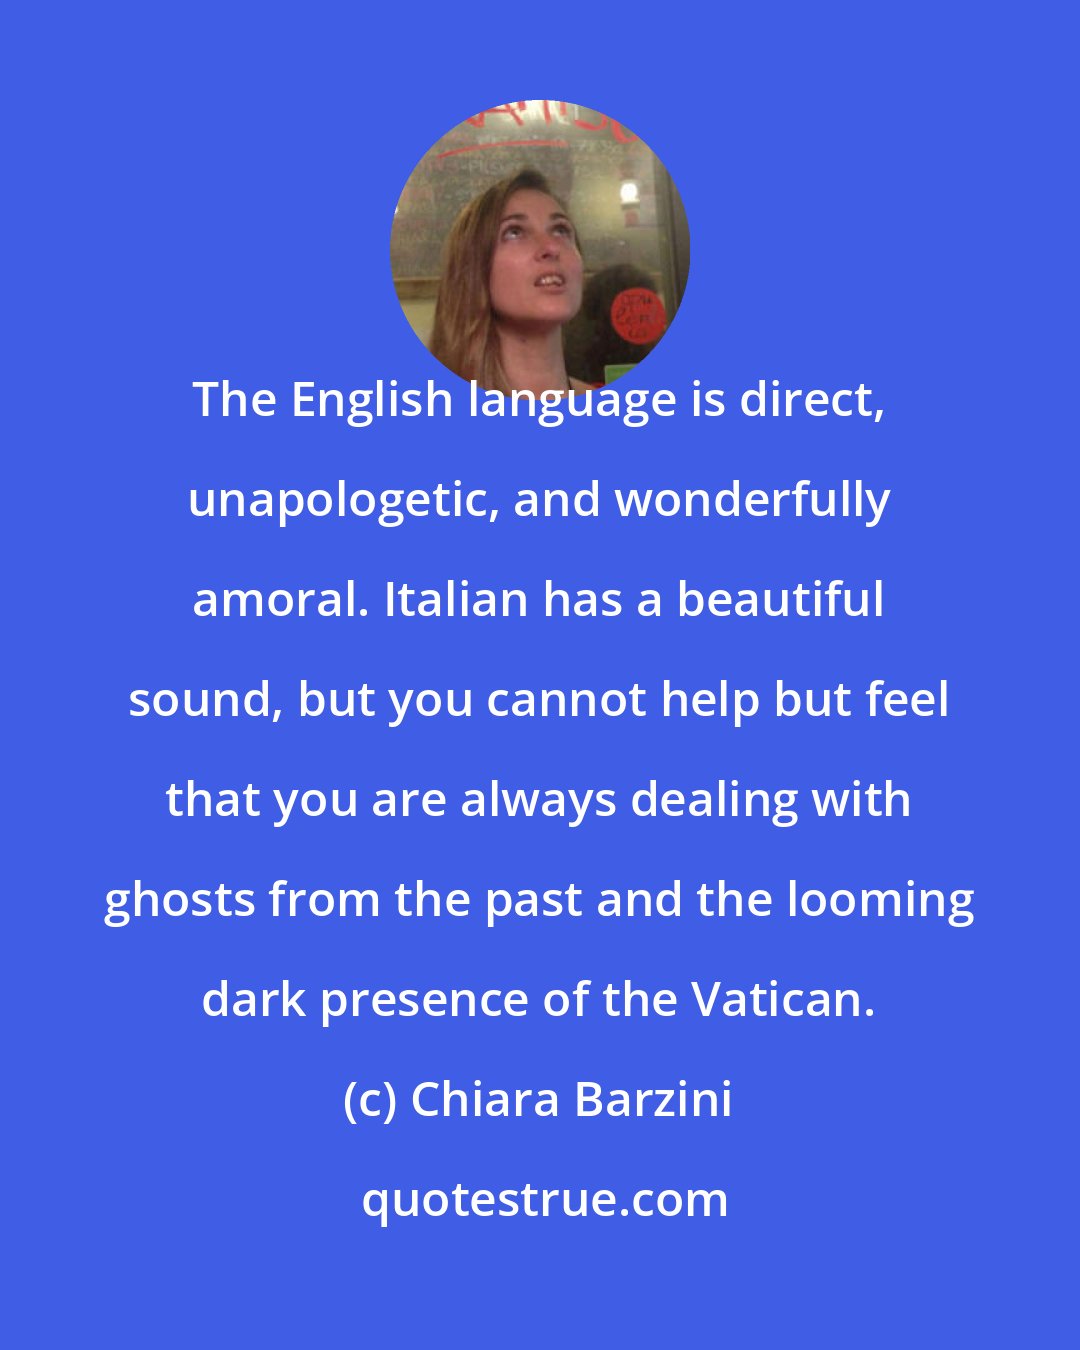 Chiara Barzini: The English language is direct, unapologetic, and wonderfully amoral. Italian has a beautiful sound, but you cannot help but feel that you are always dealing with ghosts from the past and the looming dark presence of the Vatican.